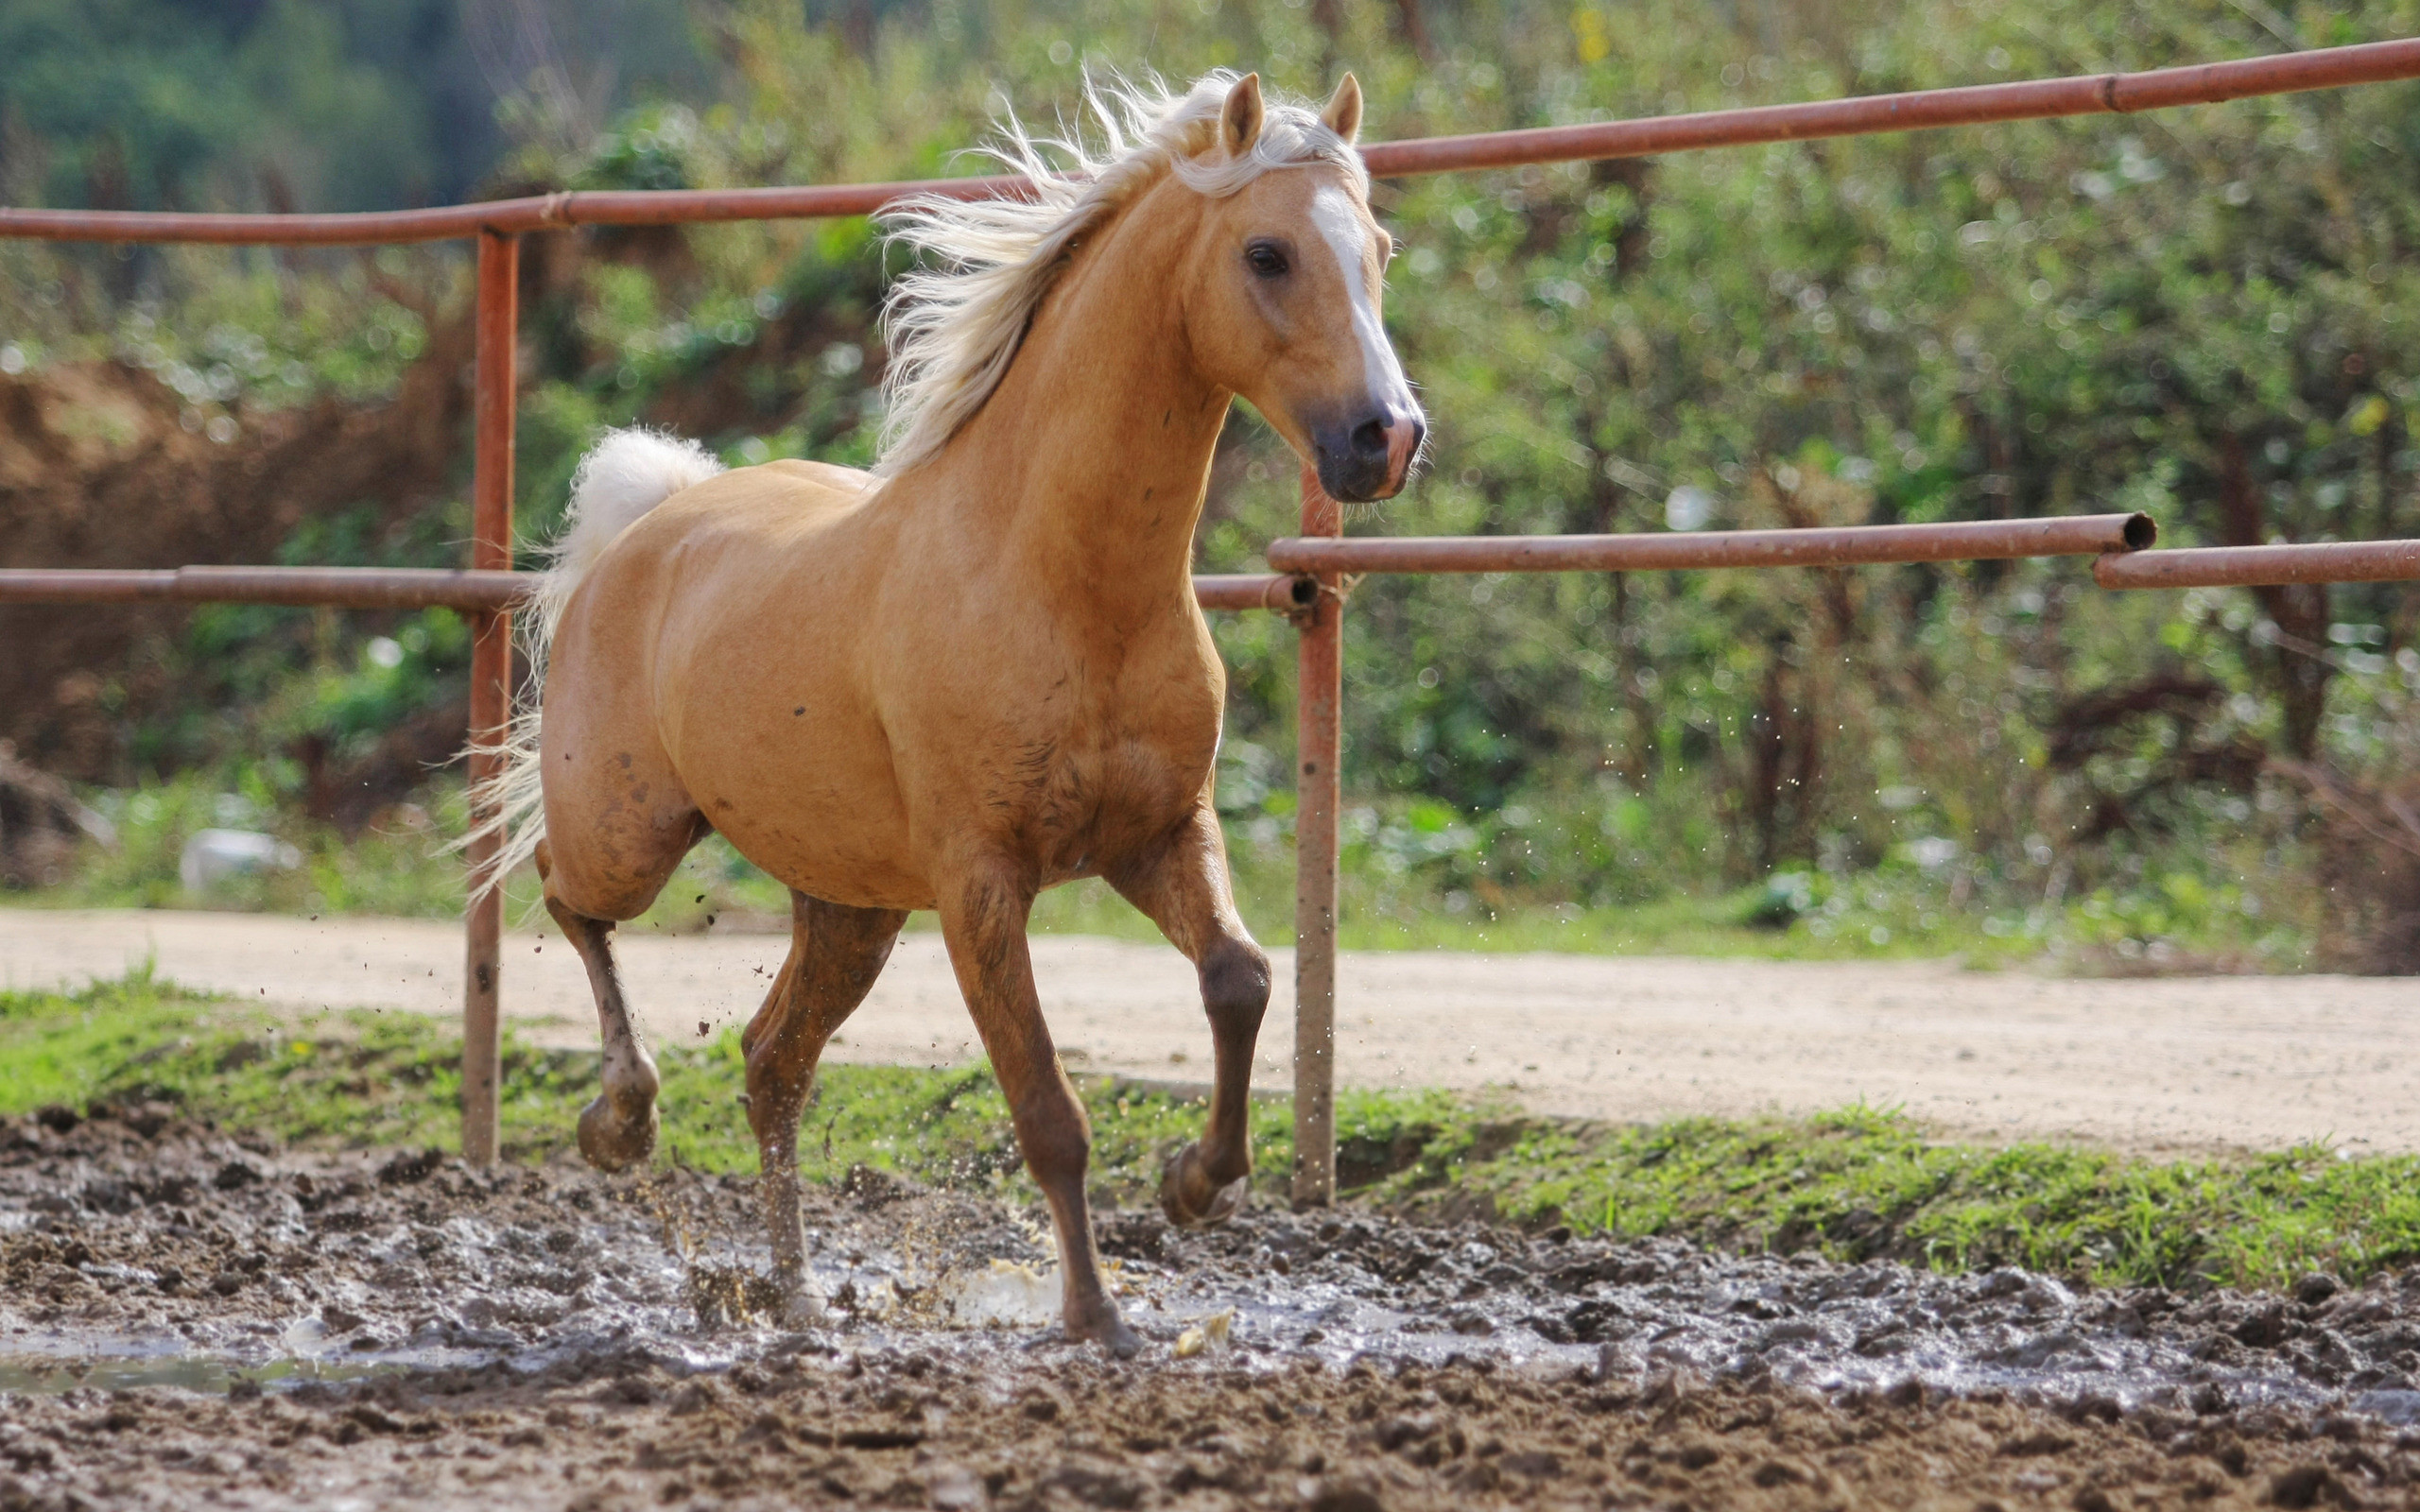 2560x1600 Mobile Spring Horse Pictures - HQFX